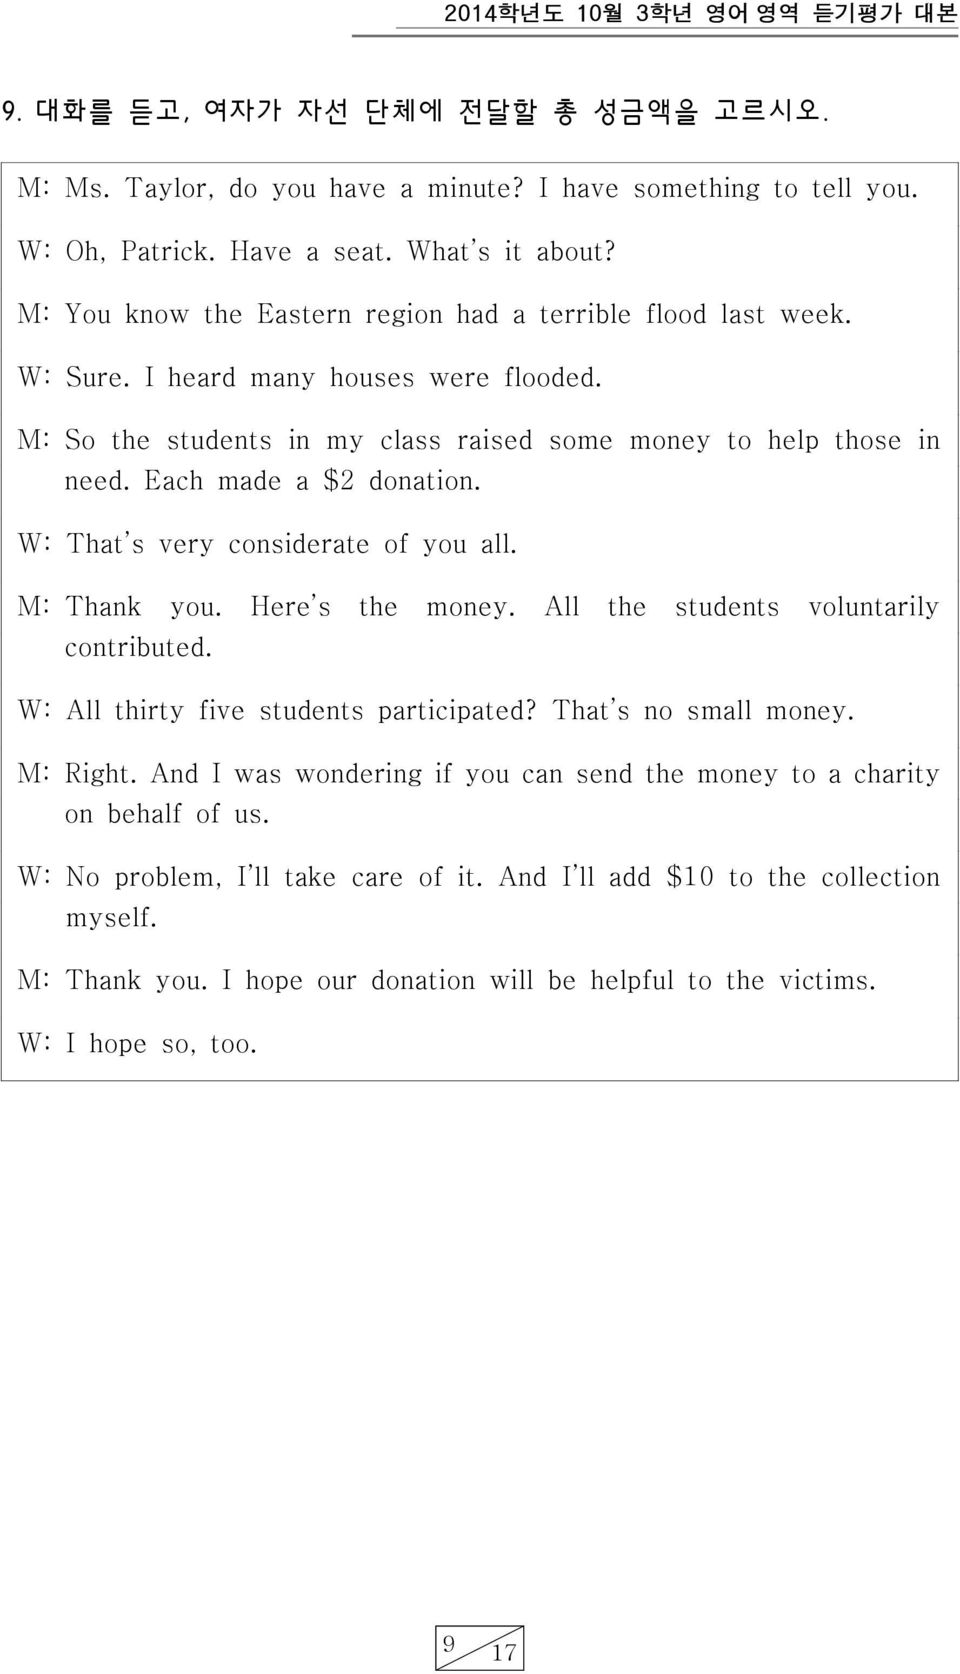 Each made a $2 donation. W: That s very considerate of you all. M: Thank you. Here s the money. All the students voluntarily contributed. W: All thirty five students participated?